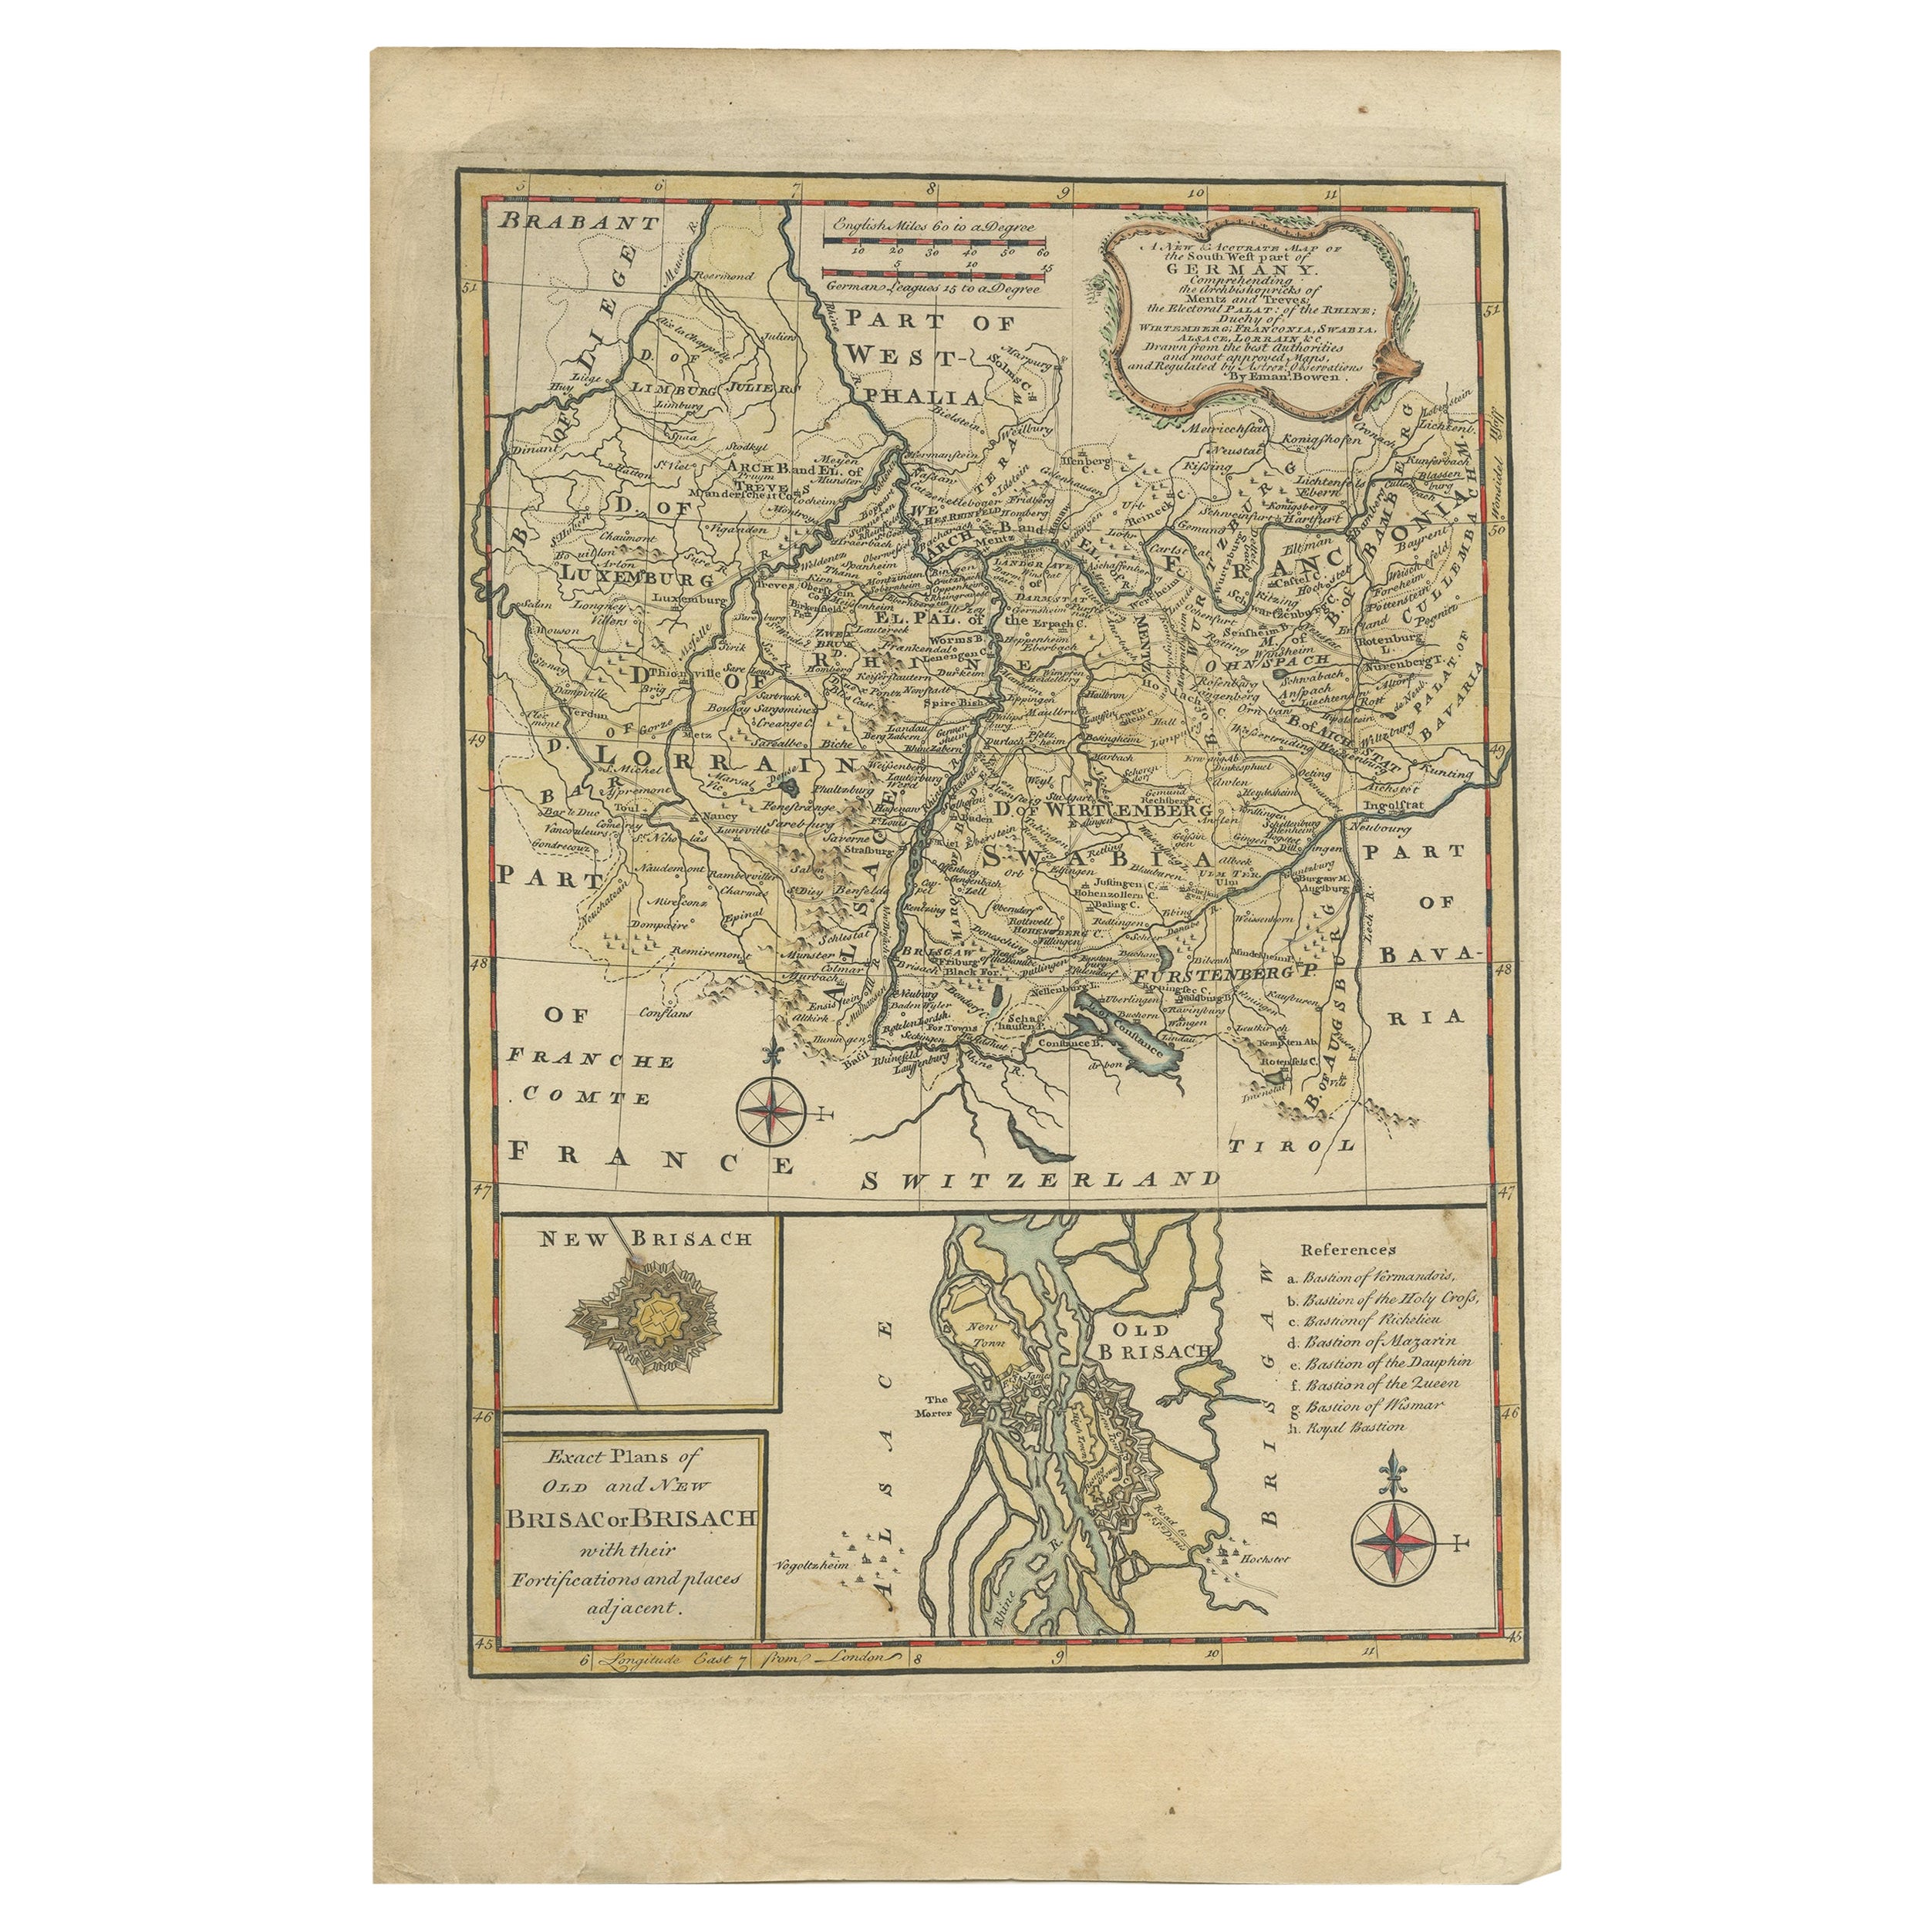 Antique map Germany titled 'A New and Accurate Map of the South West part of Germany. Comprehending the Archbishoprics of Mentz and Treves, the Electoral Palat, of the Rhine, Duchy of Wirtemberg, Franconia, Swabia, Alsace, Lorrain etc'. This map